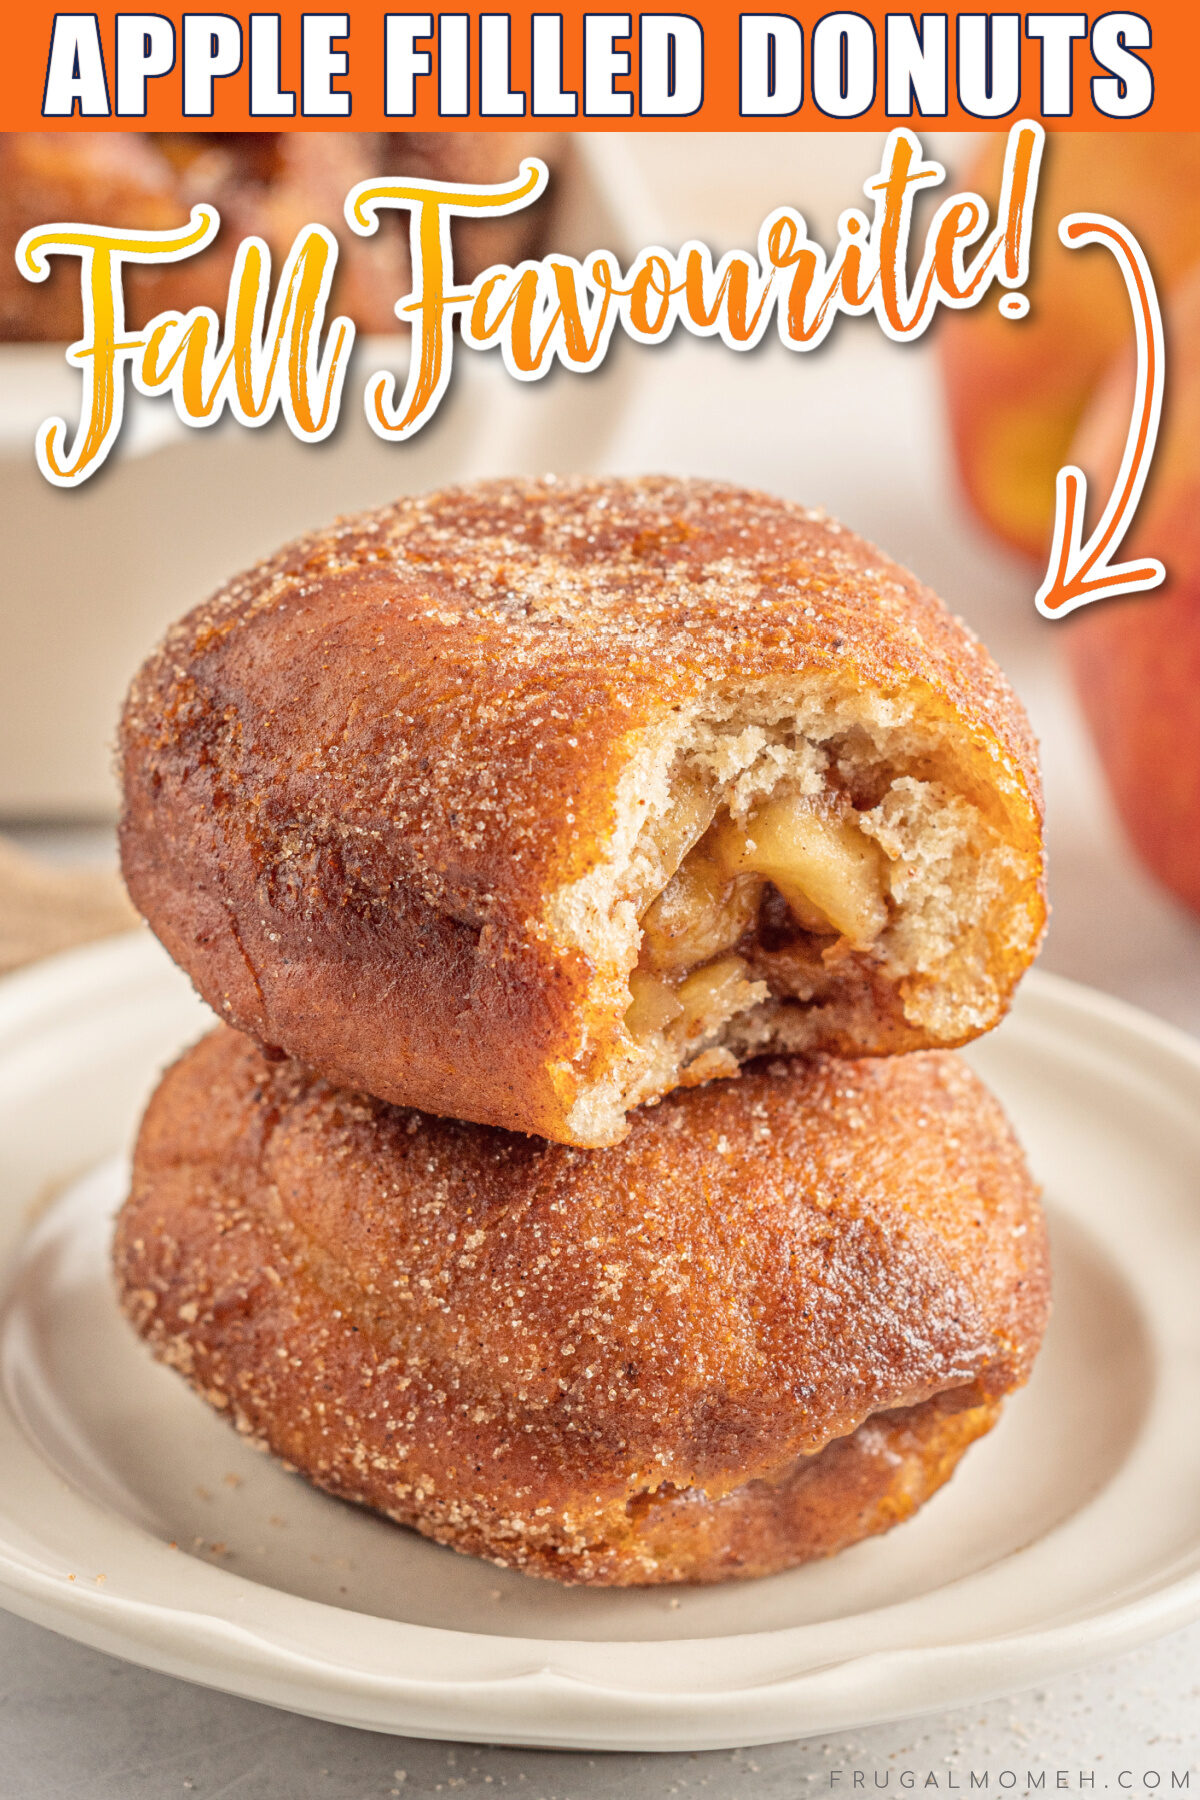 Inspired by classic apple pie, these apple filled donuts are fried to golden perfection and tossed in cinnamon sugar for a sweet finish.